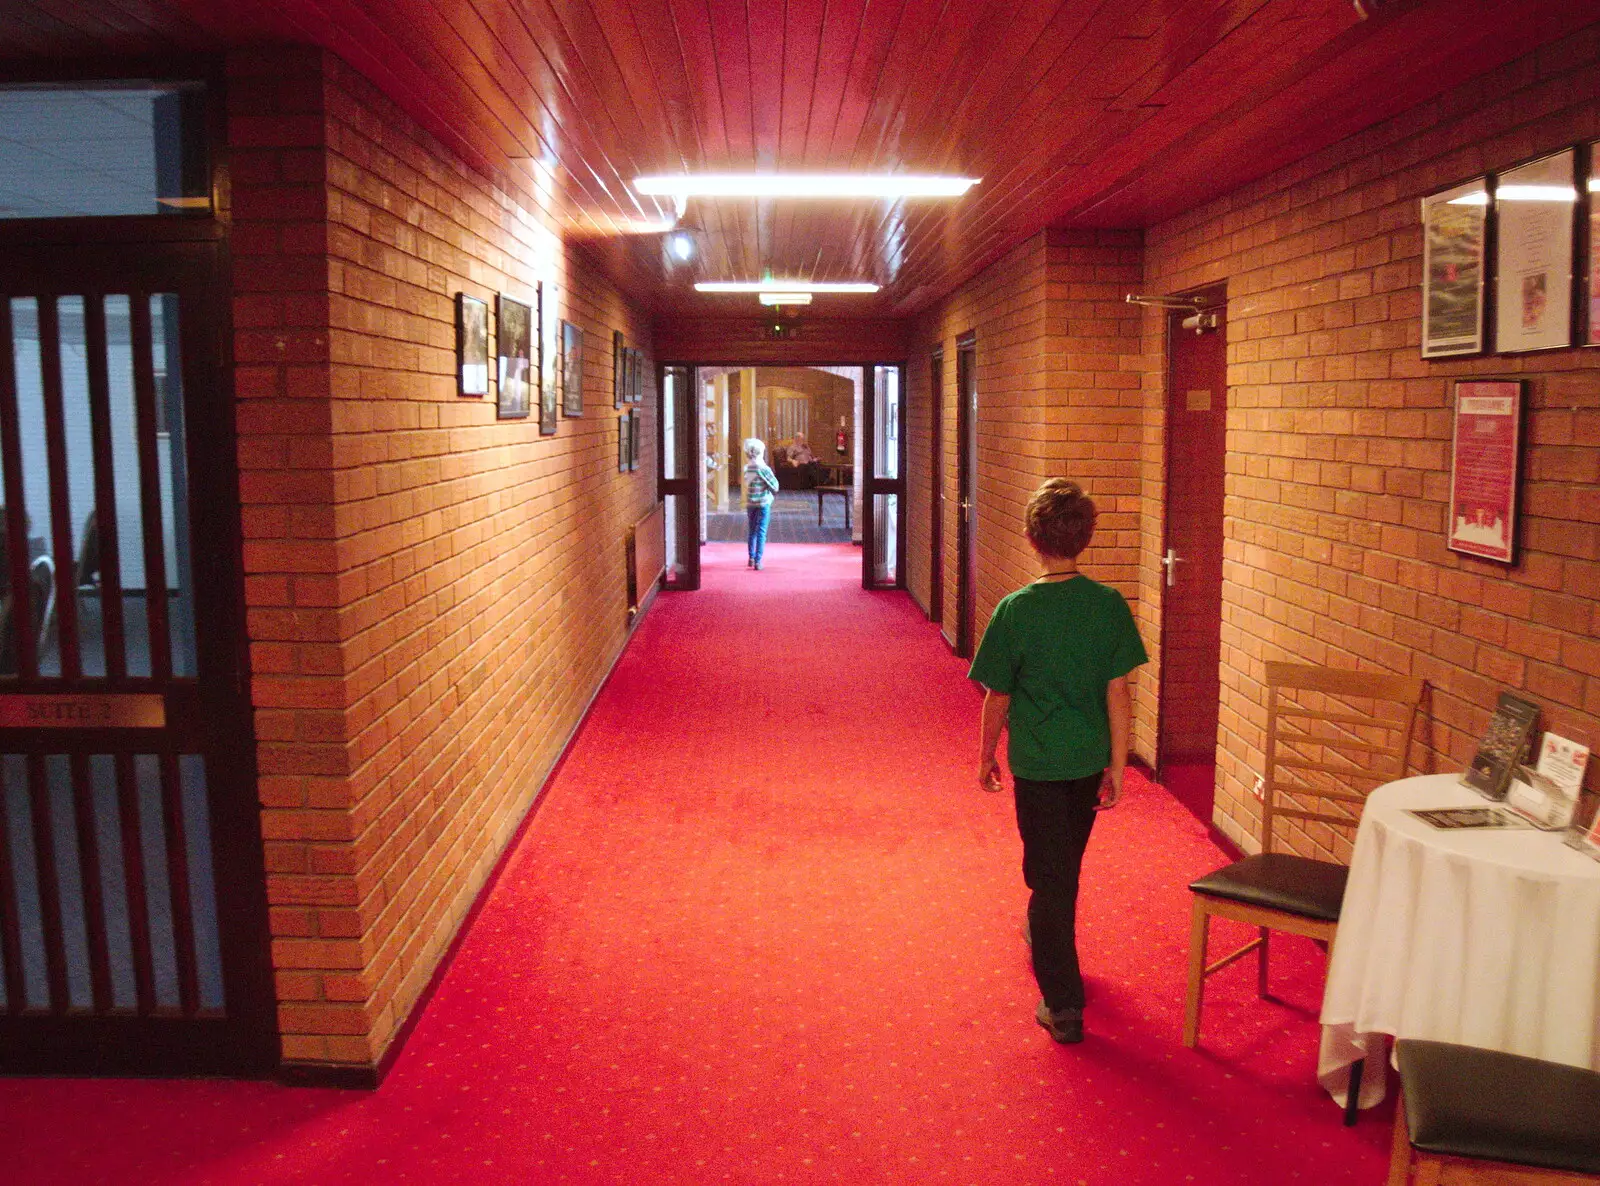 Fred roams the corridors of the 1980s hotel, from The Summer Trip to Ireland, Monkstown, Co. Dublin, Ireland - 9th August 2019